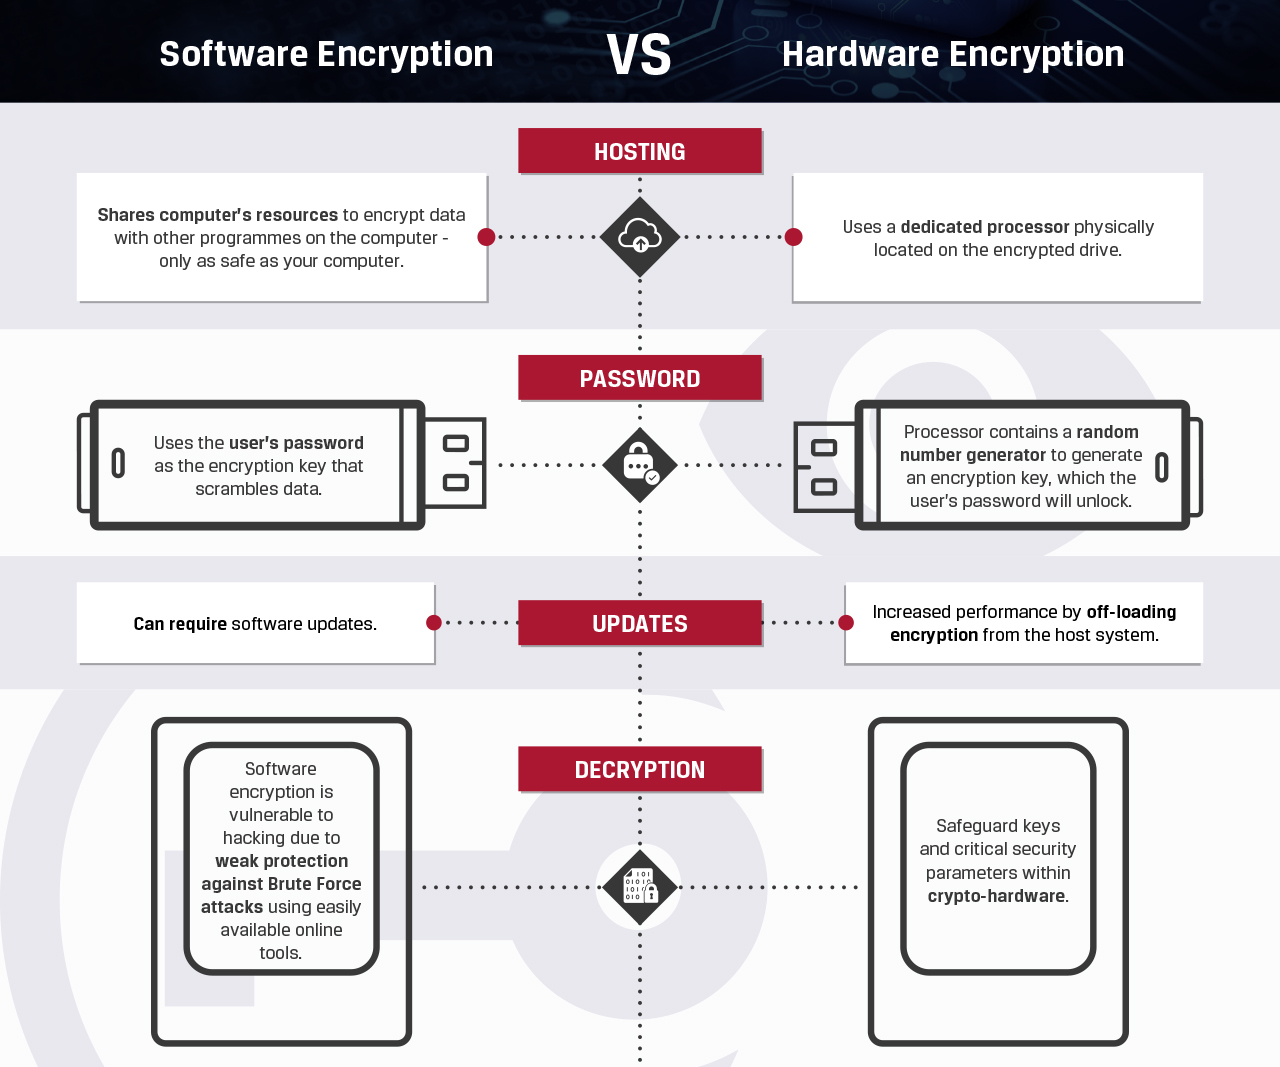 A snippet from the Software vs. hardware encryption infographic